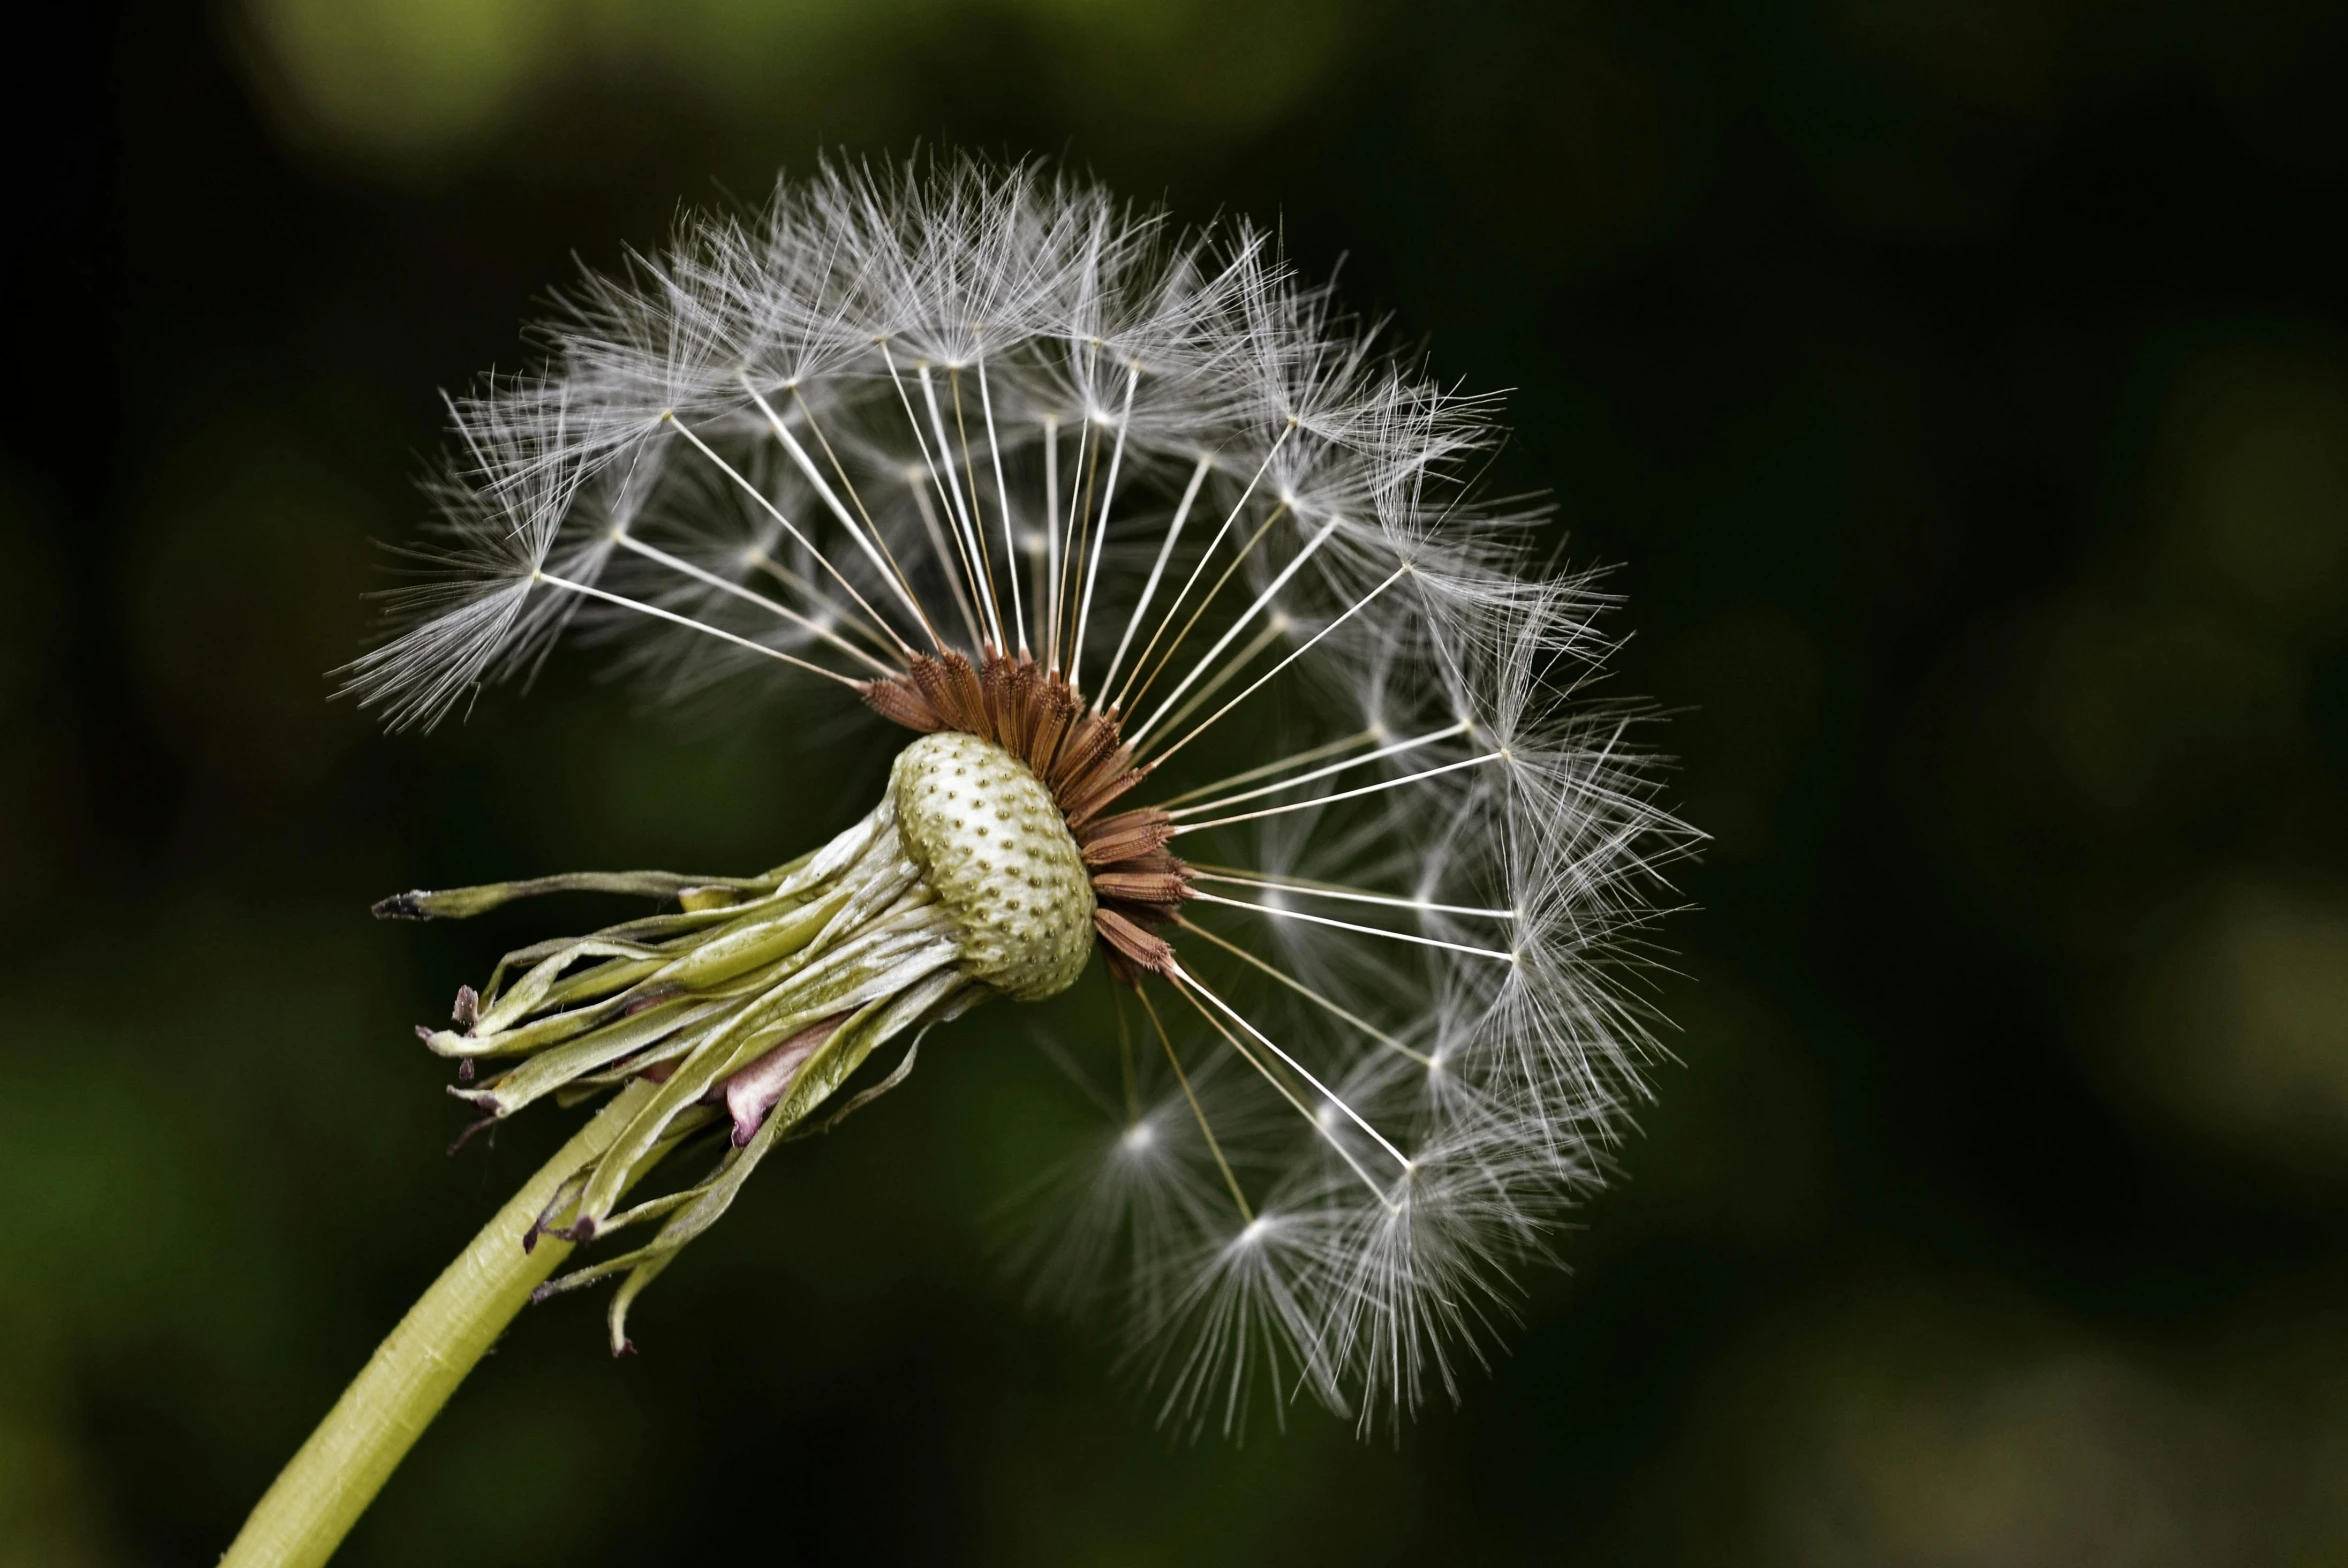 a dandelion with a brown center is pictured against a black background